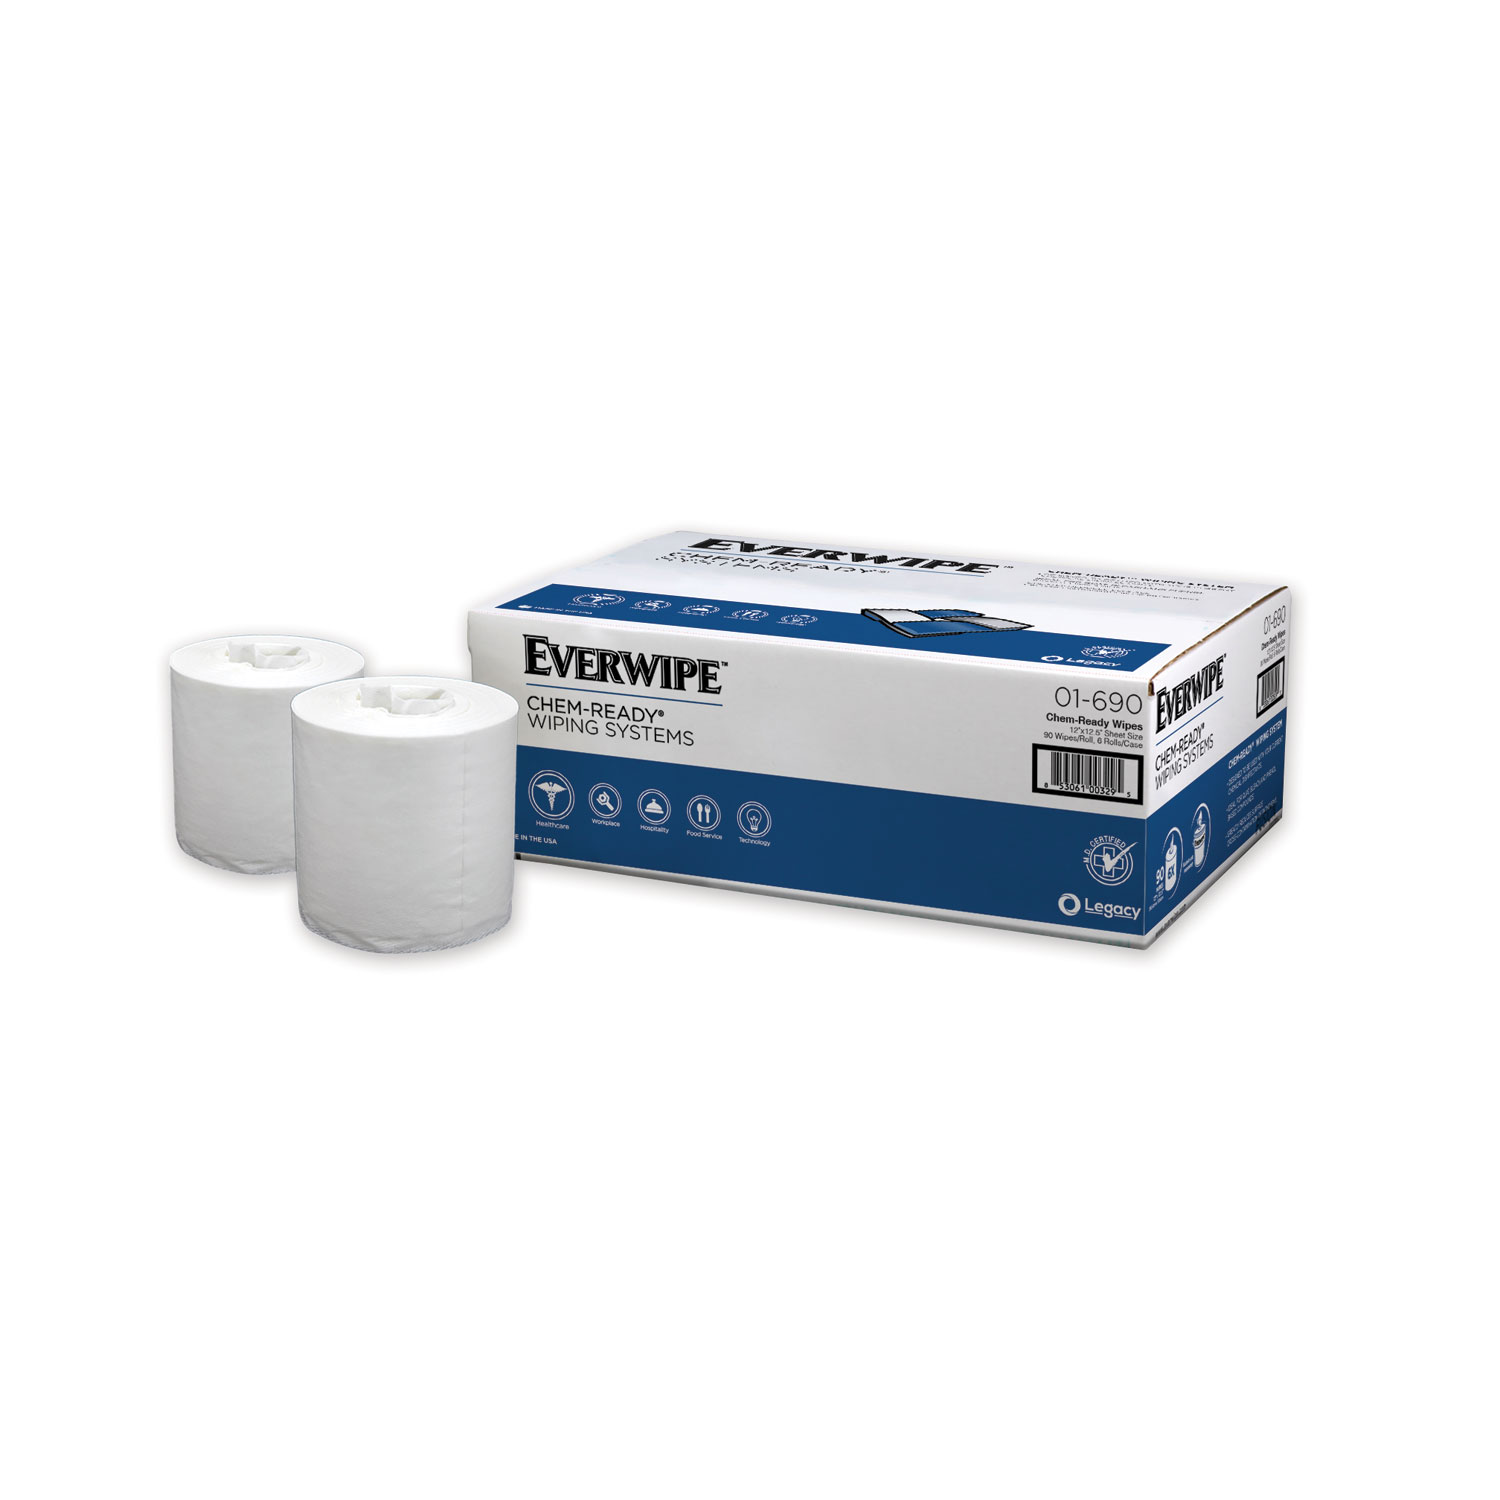  Legacy 1690 Everwipe Chem-Ready Dry Wipes, 12 x 12.5, 90/Box, 6 Boxes/Carton (GN101690) 